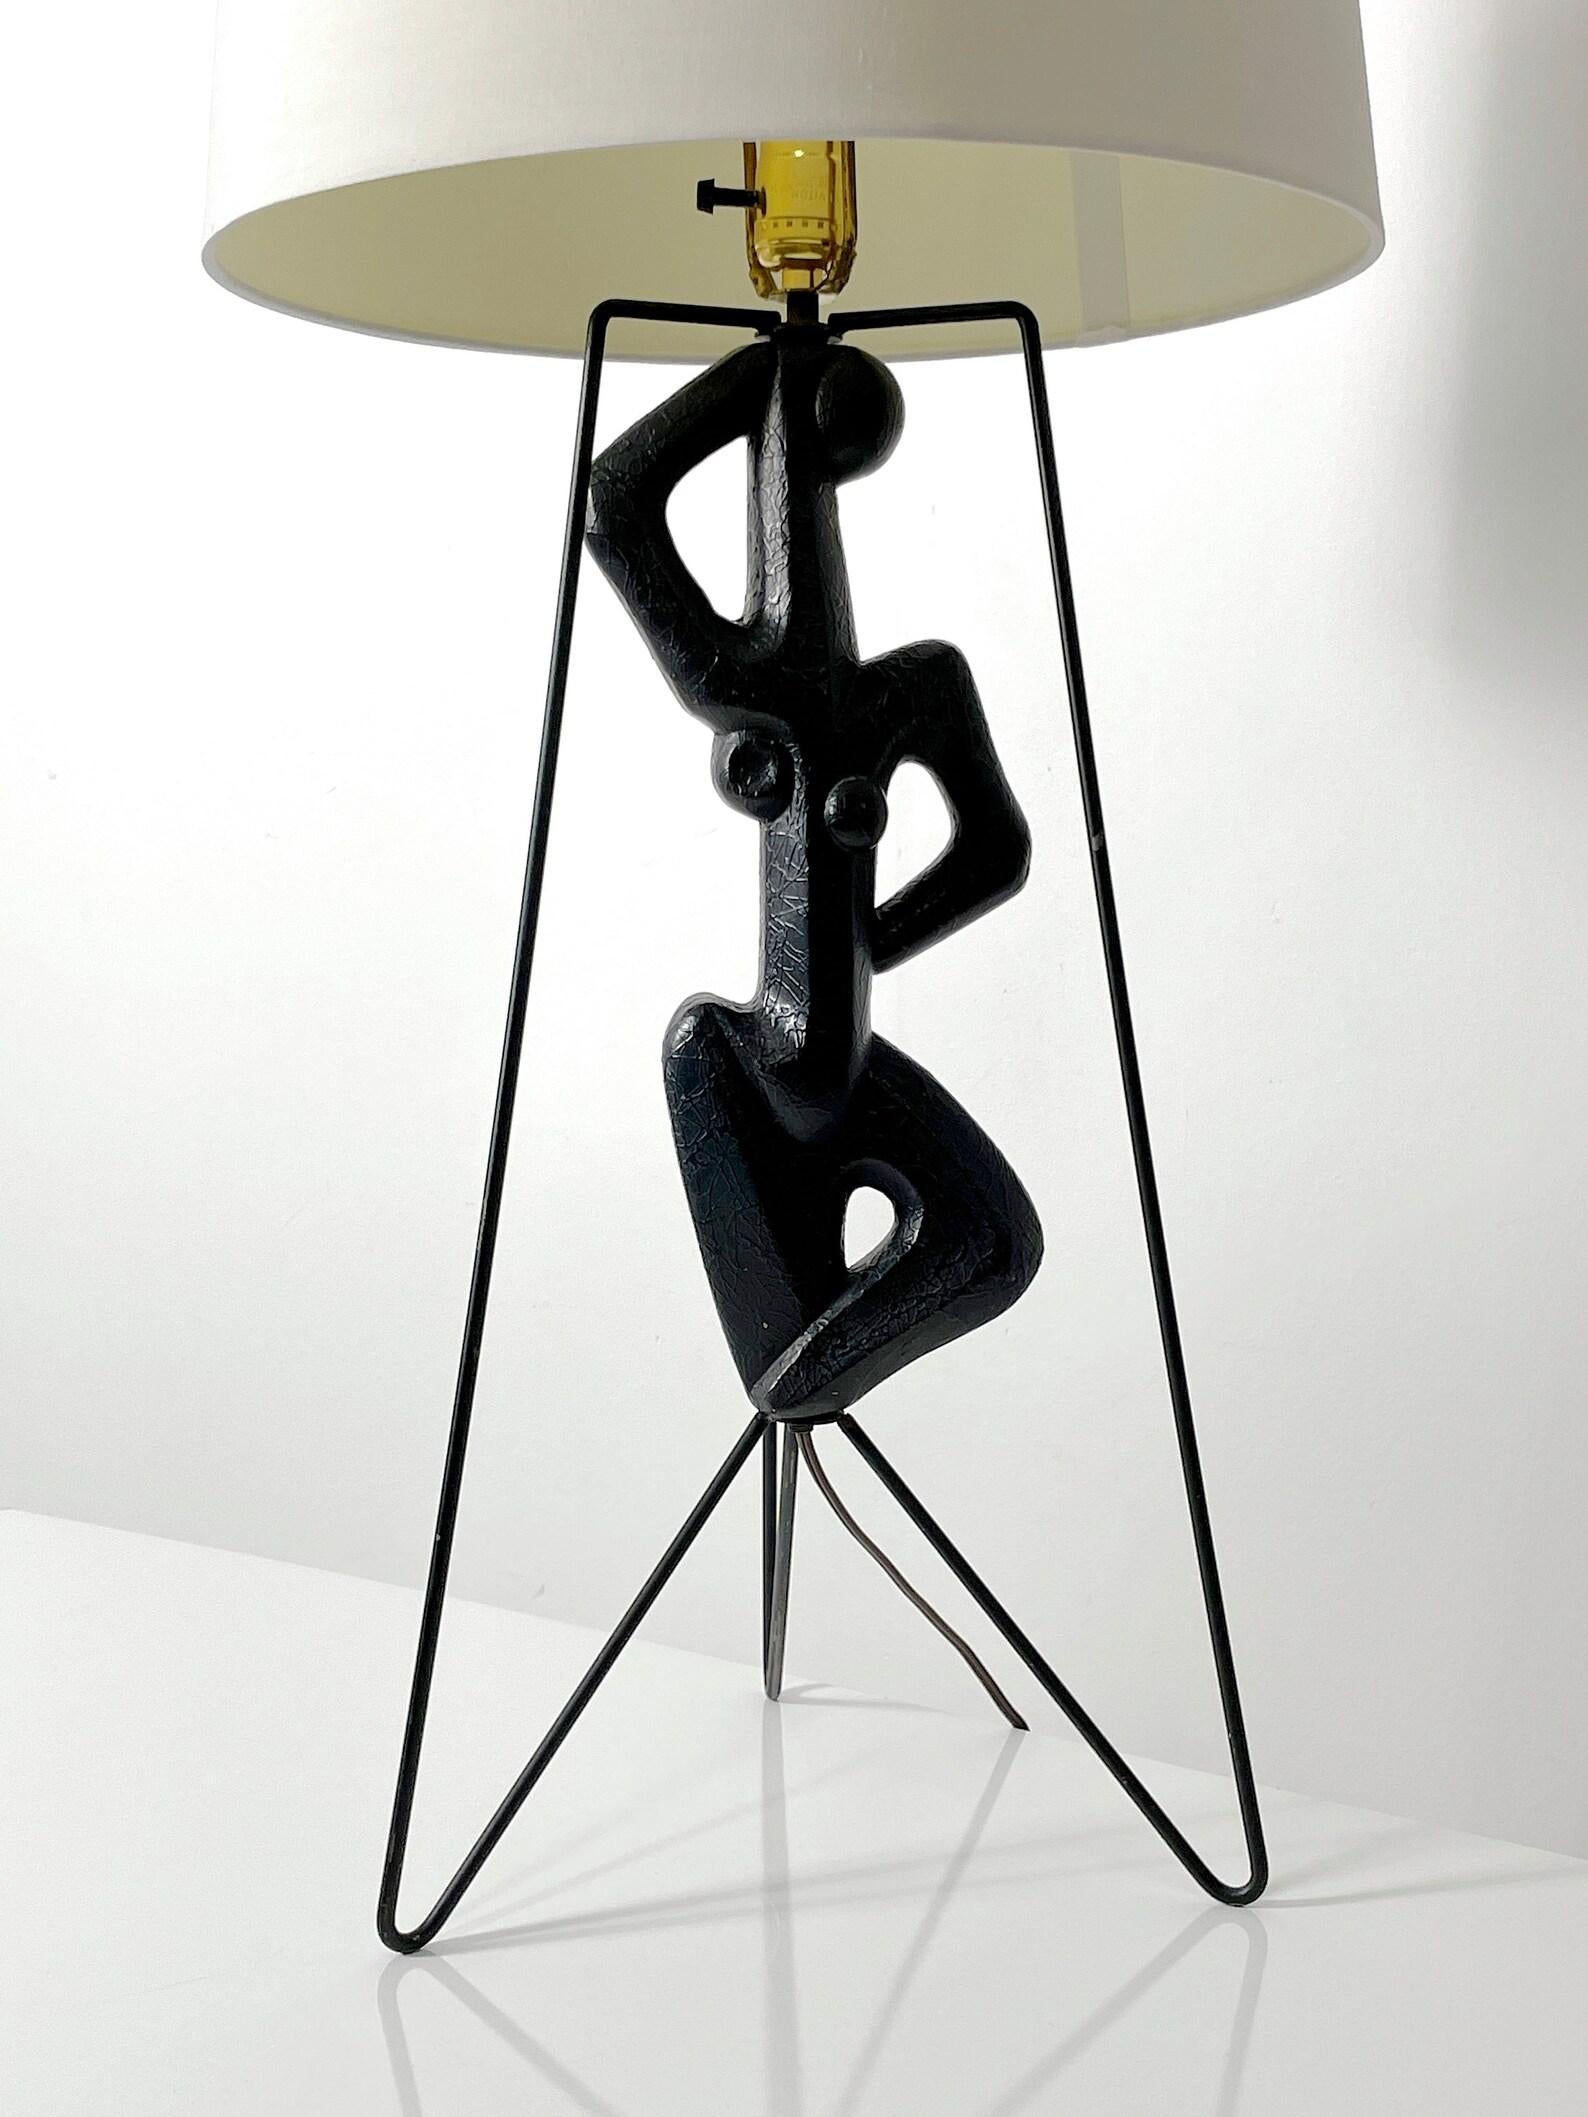 Modernist Frederic Weinberg Figural Iron Hairpin Table Lamp 1950s  In Good Condition For Sale In Troy, MI